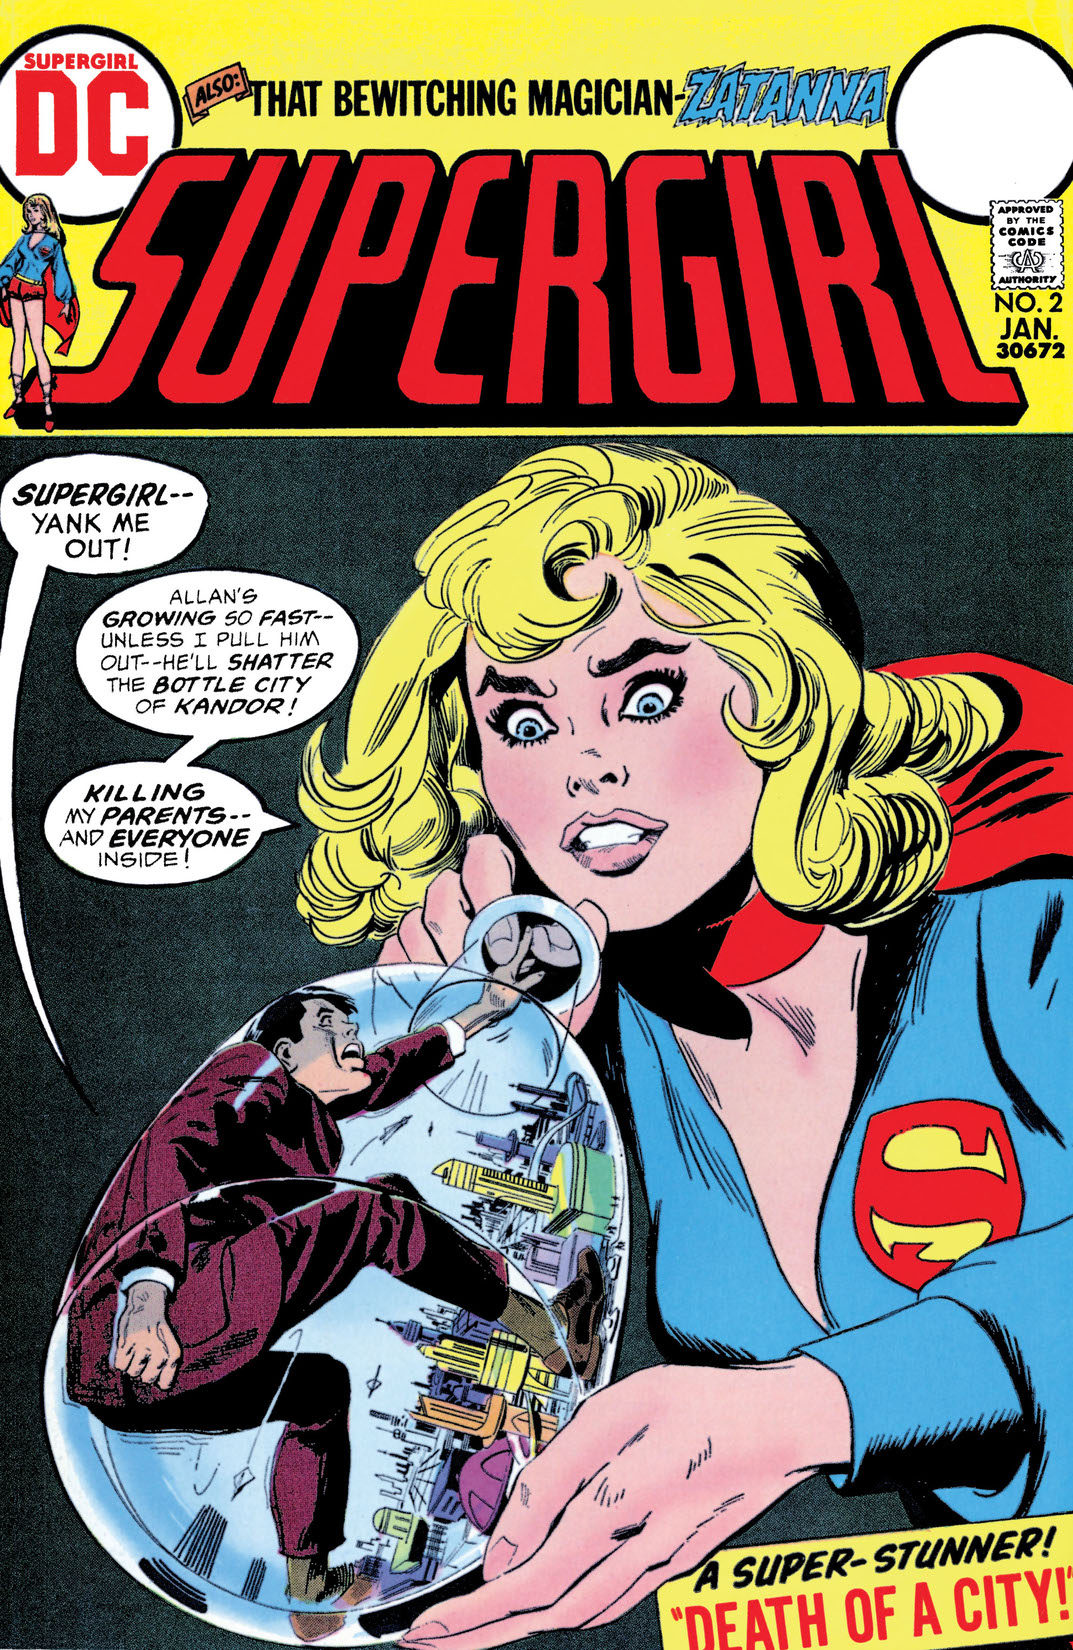 Supergirl (1972-) #2 preview images